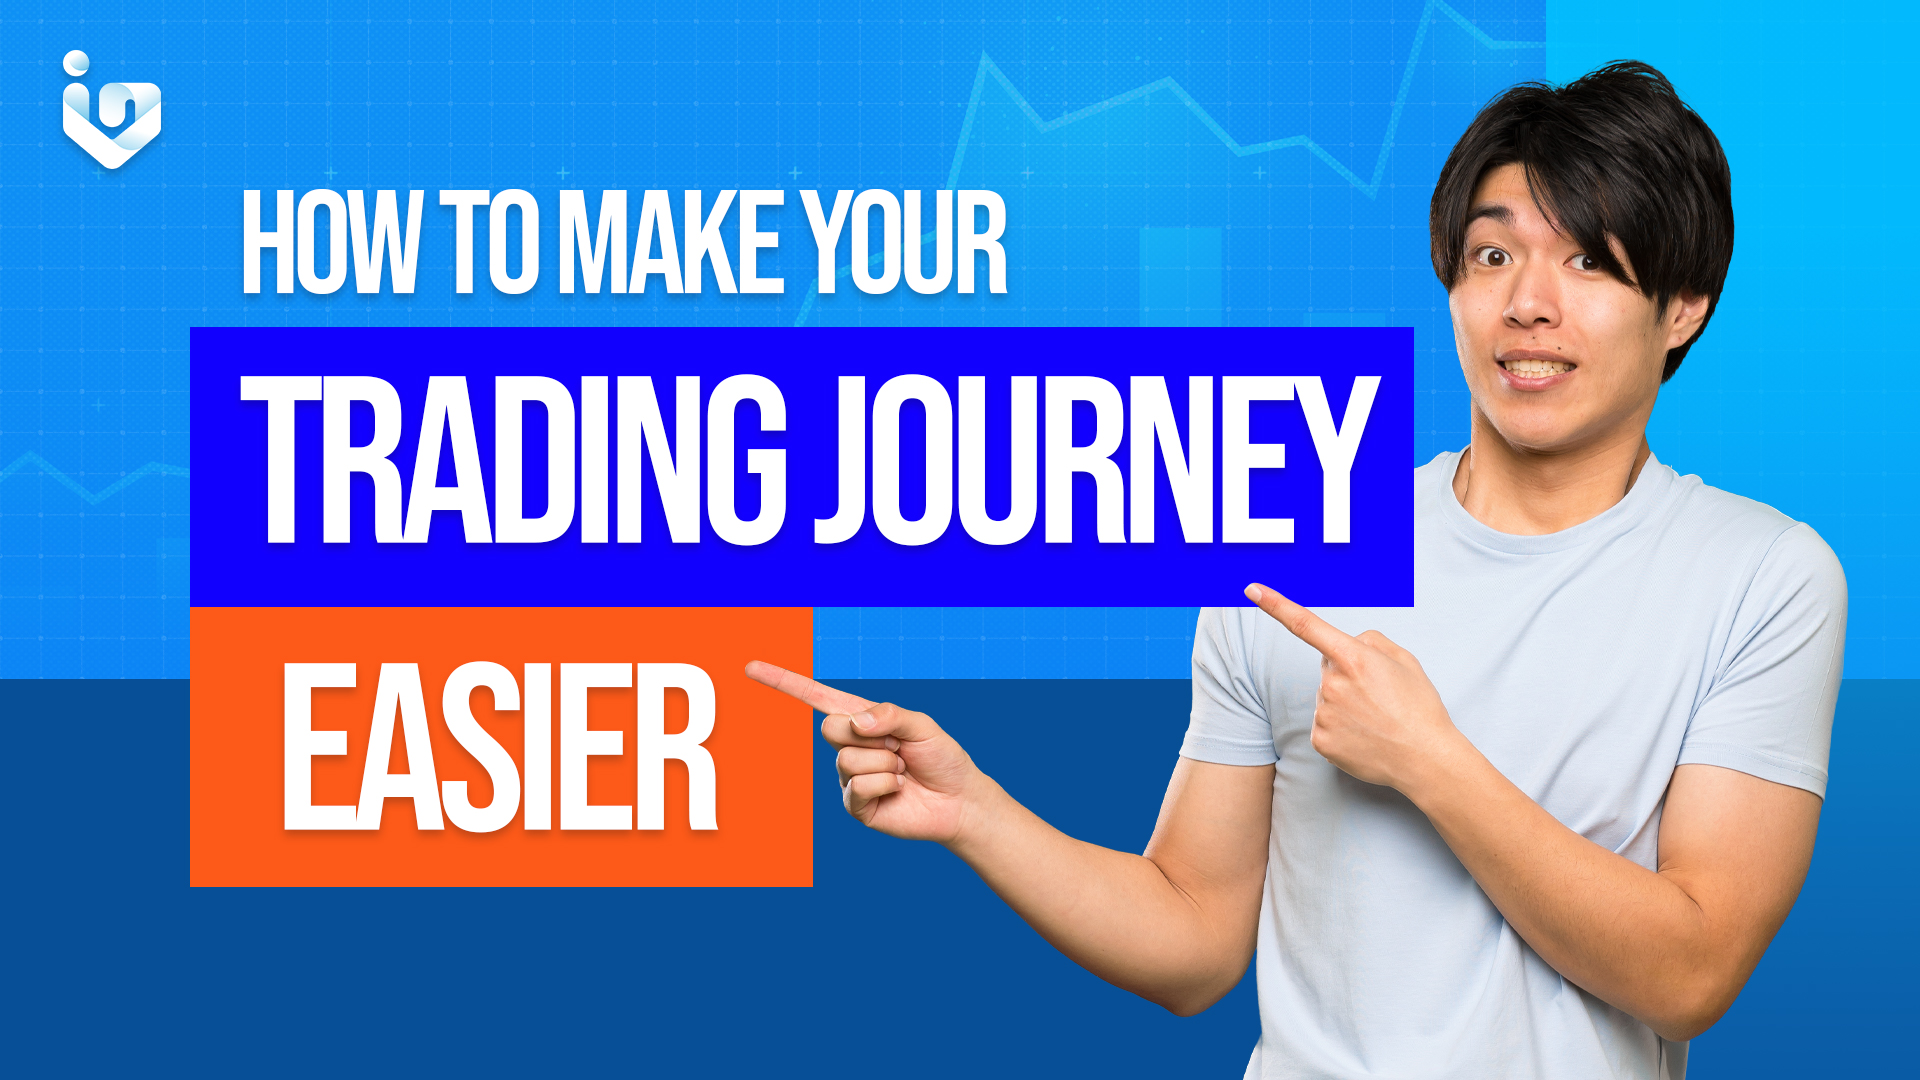 How to make your trading journey easier